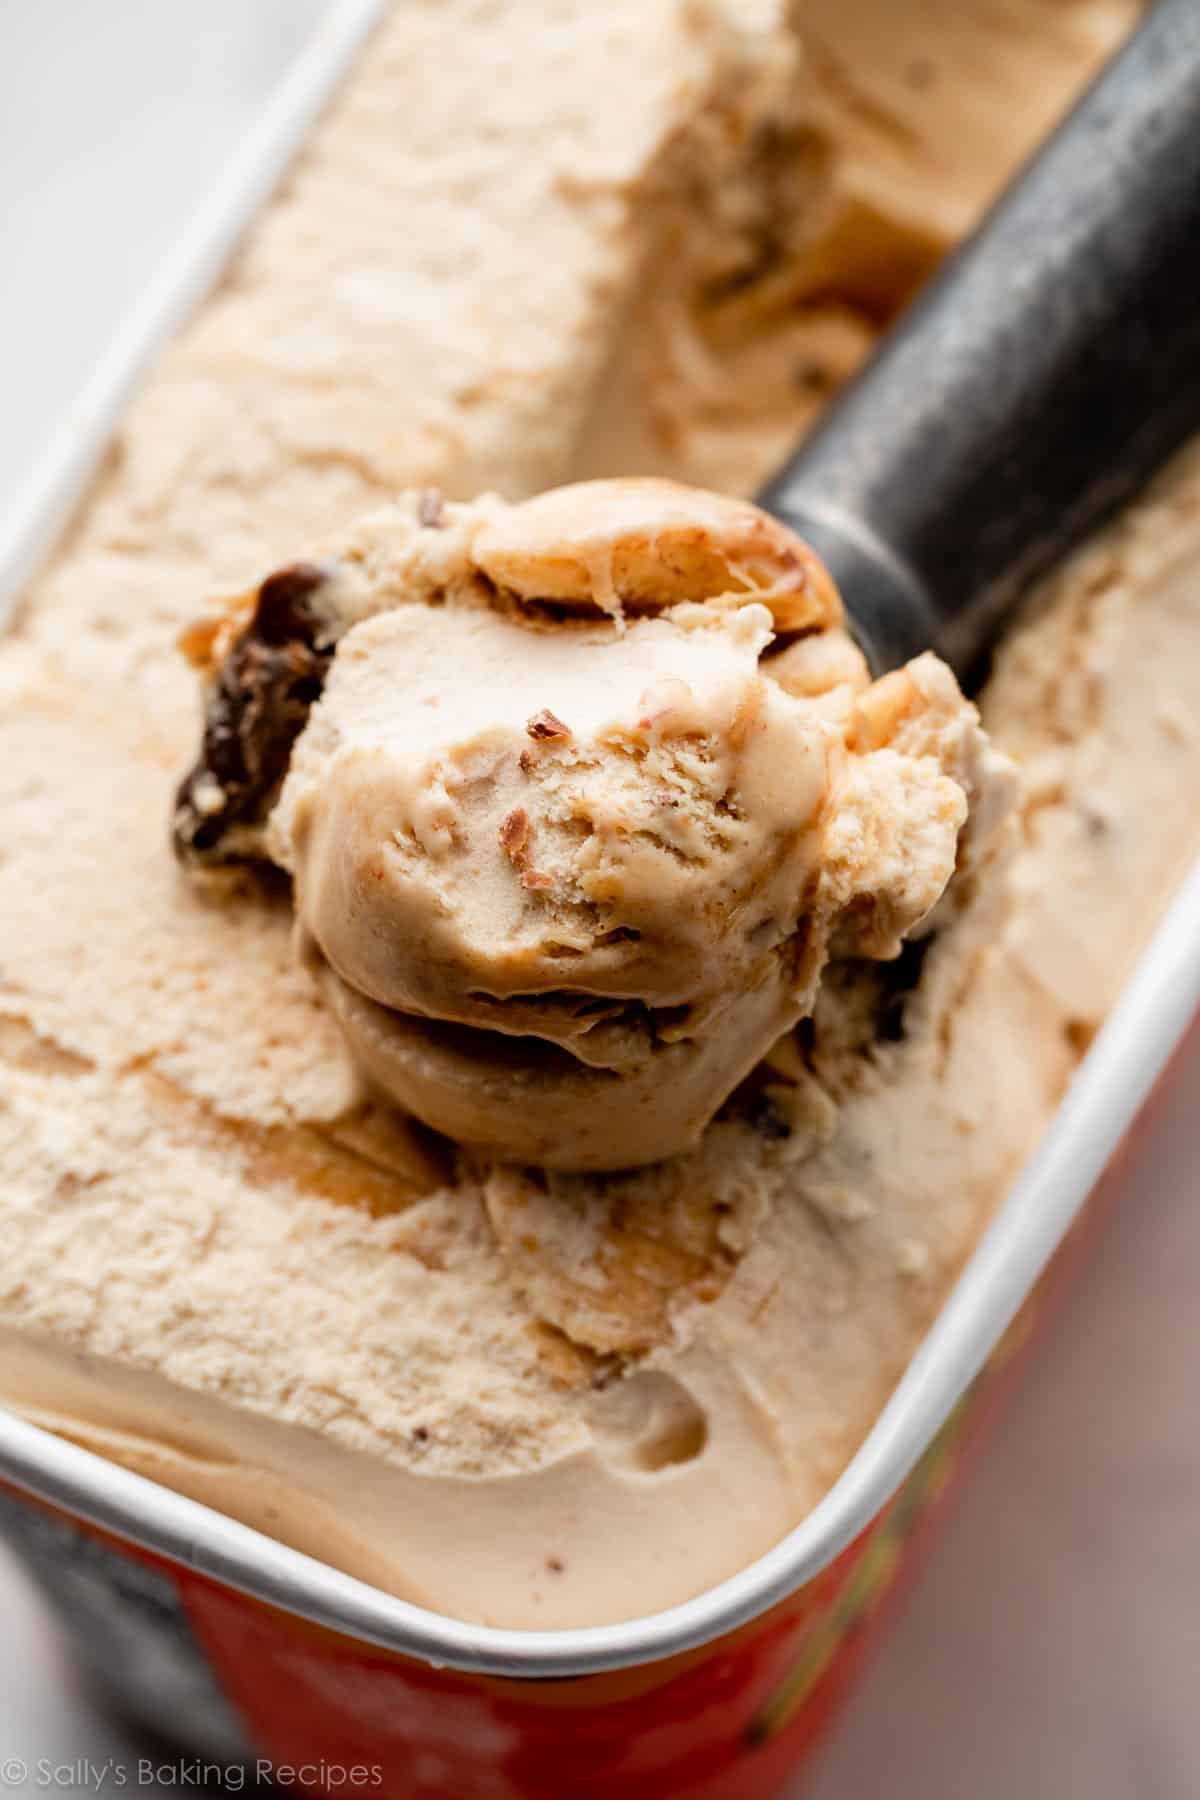 peanut butter ice cream being scooped out of carton with ice cream scoop.